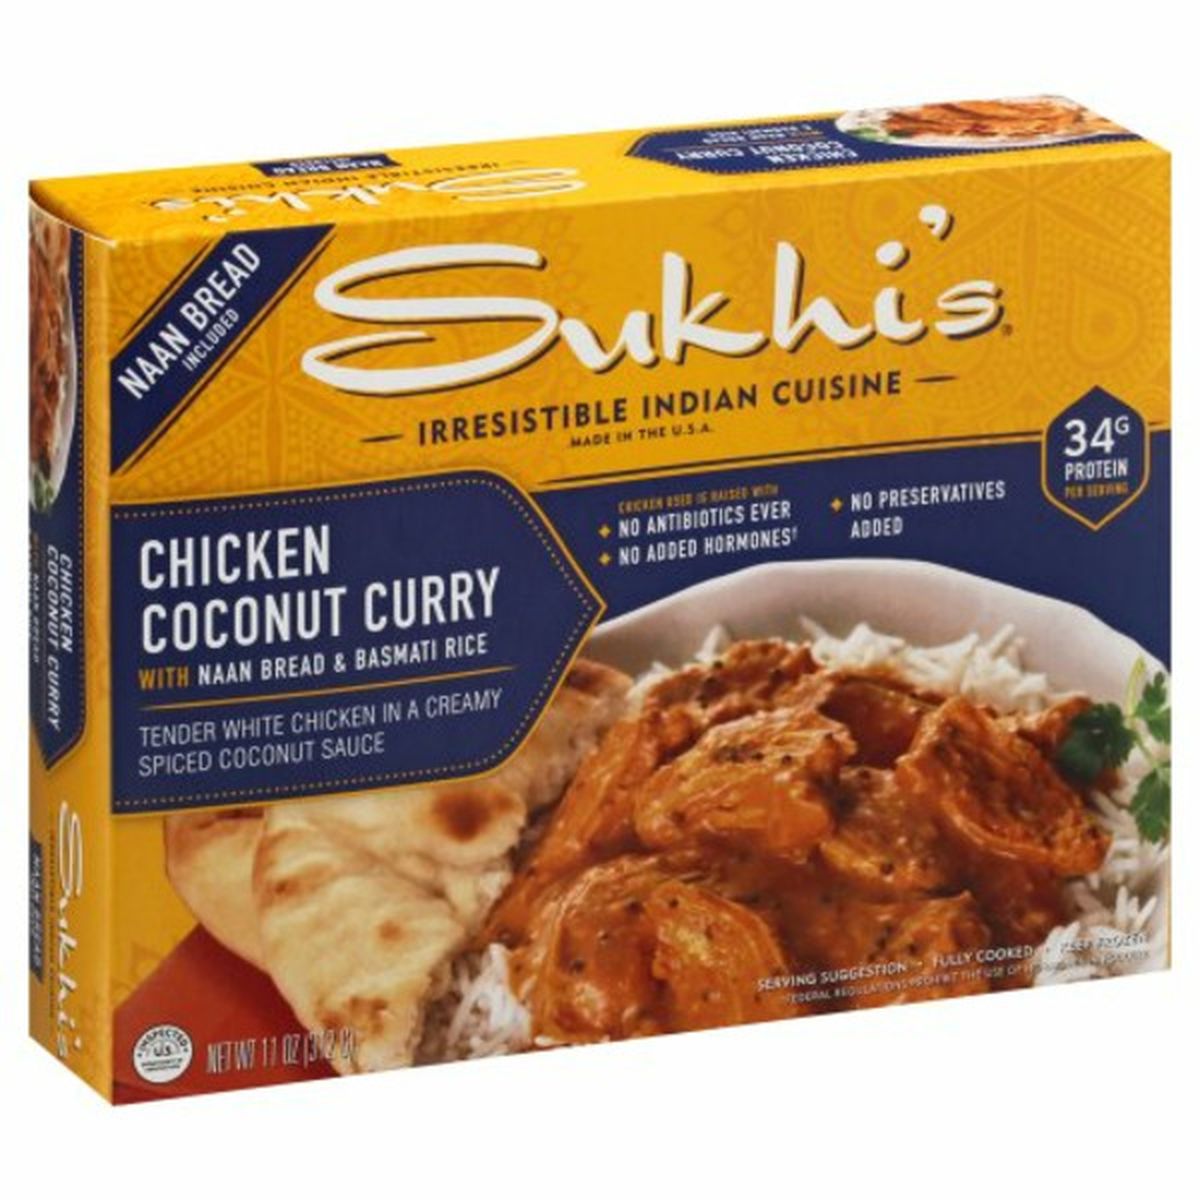 Calories in Sukhi's Chicken Coconut Curry, with Naan Bread & Basmati Rice